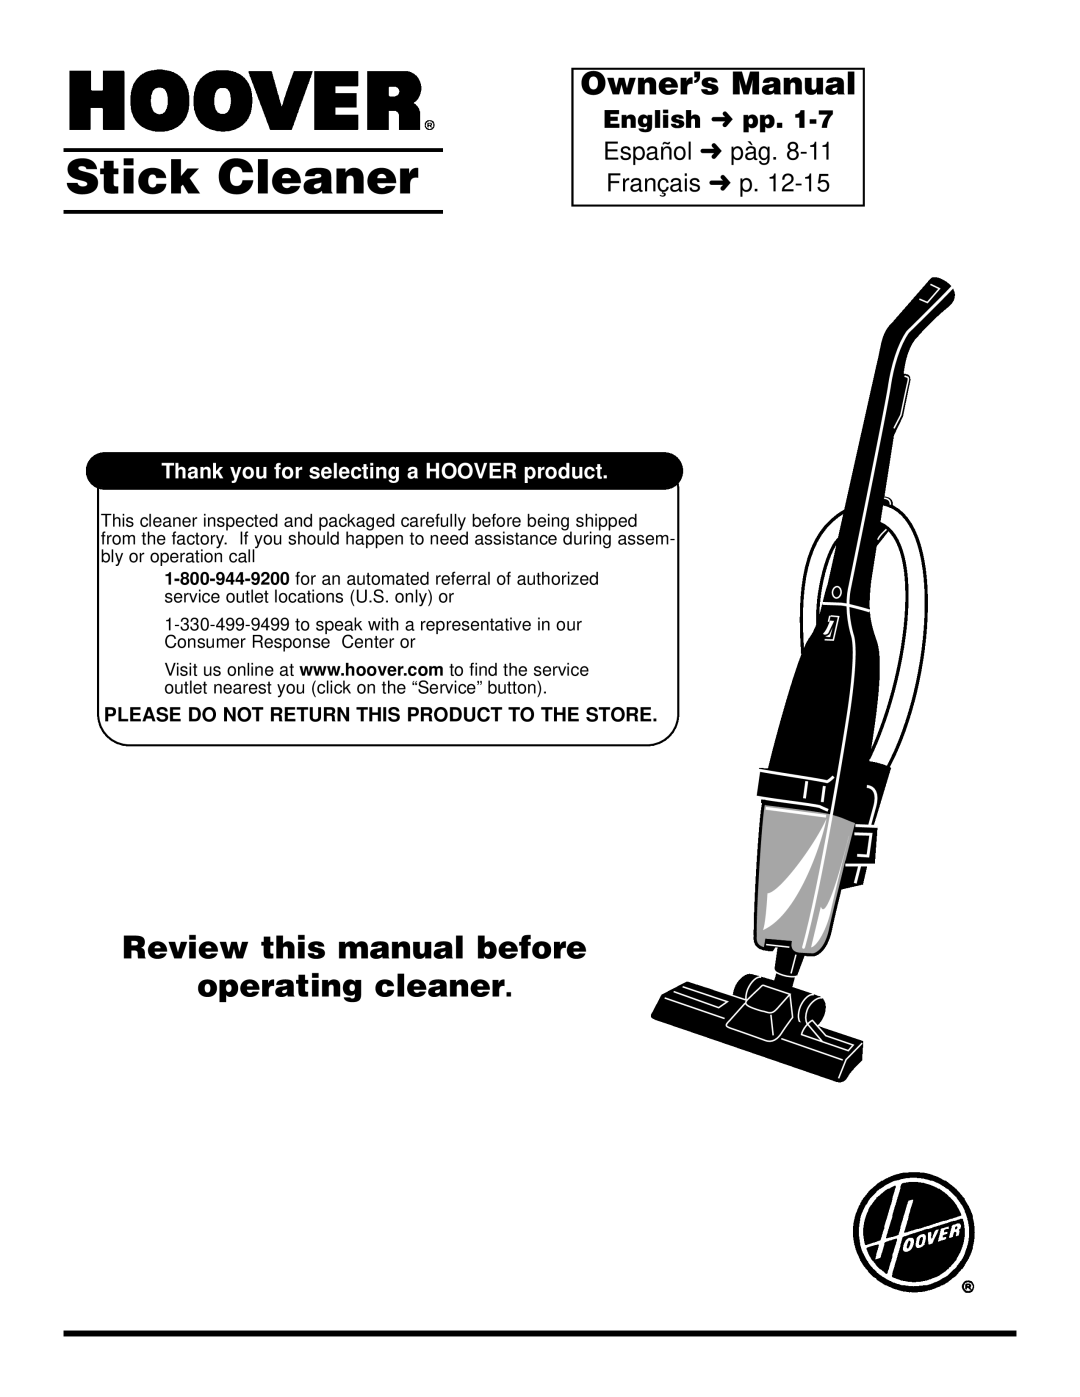 Hoover Stick Cleaner owner manual Owner’s Manual, Review this manual before operating cleaner 